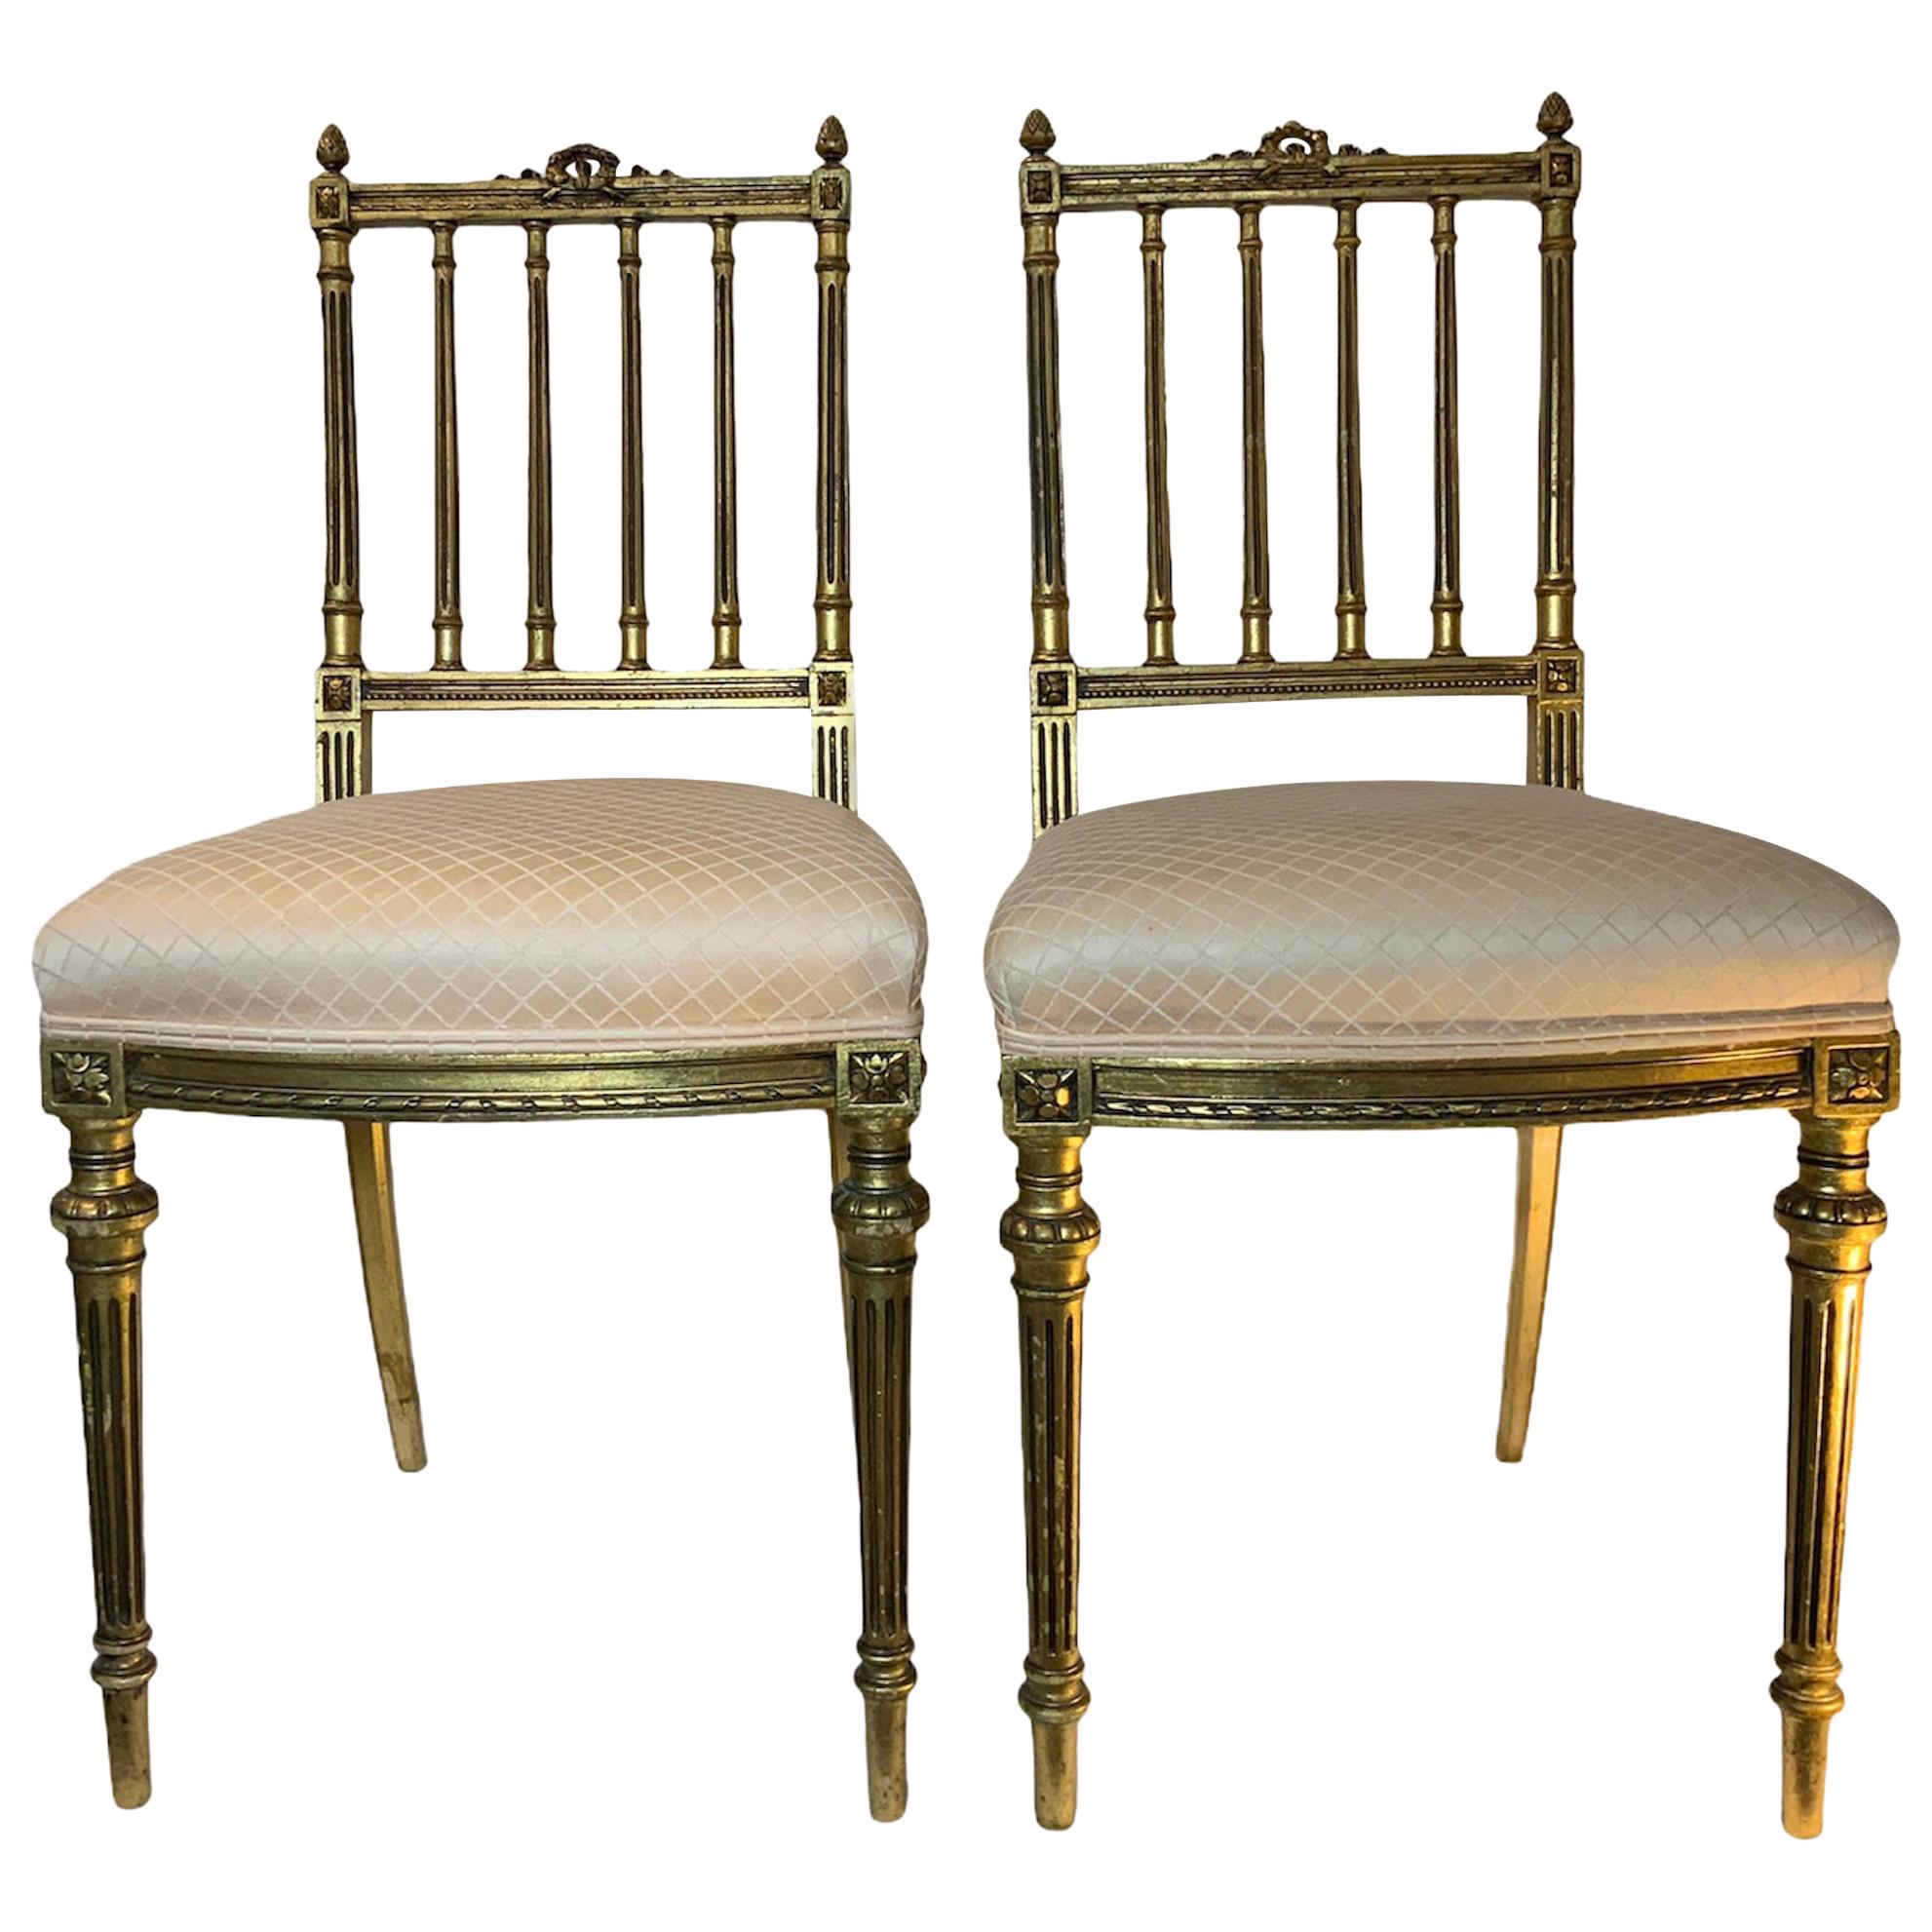 Sheraton Style Pair of Gilt Wood Parlor Chairs